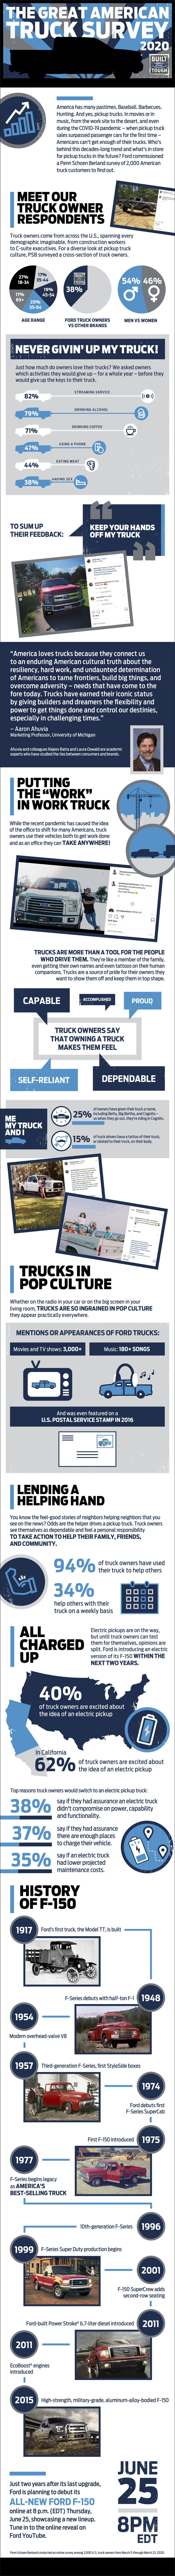 Truck Survey Ford, Ford surveyed U.S. Truck owners: Infographic, ClassicCars.com Journal